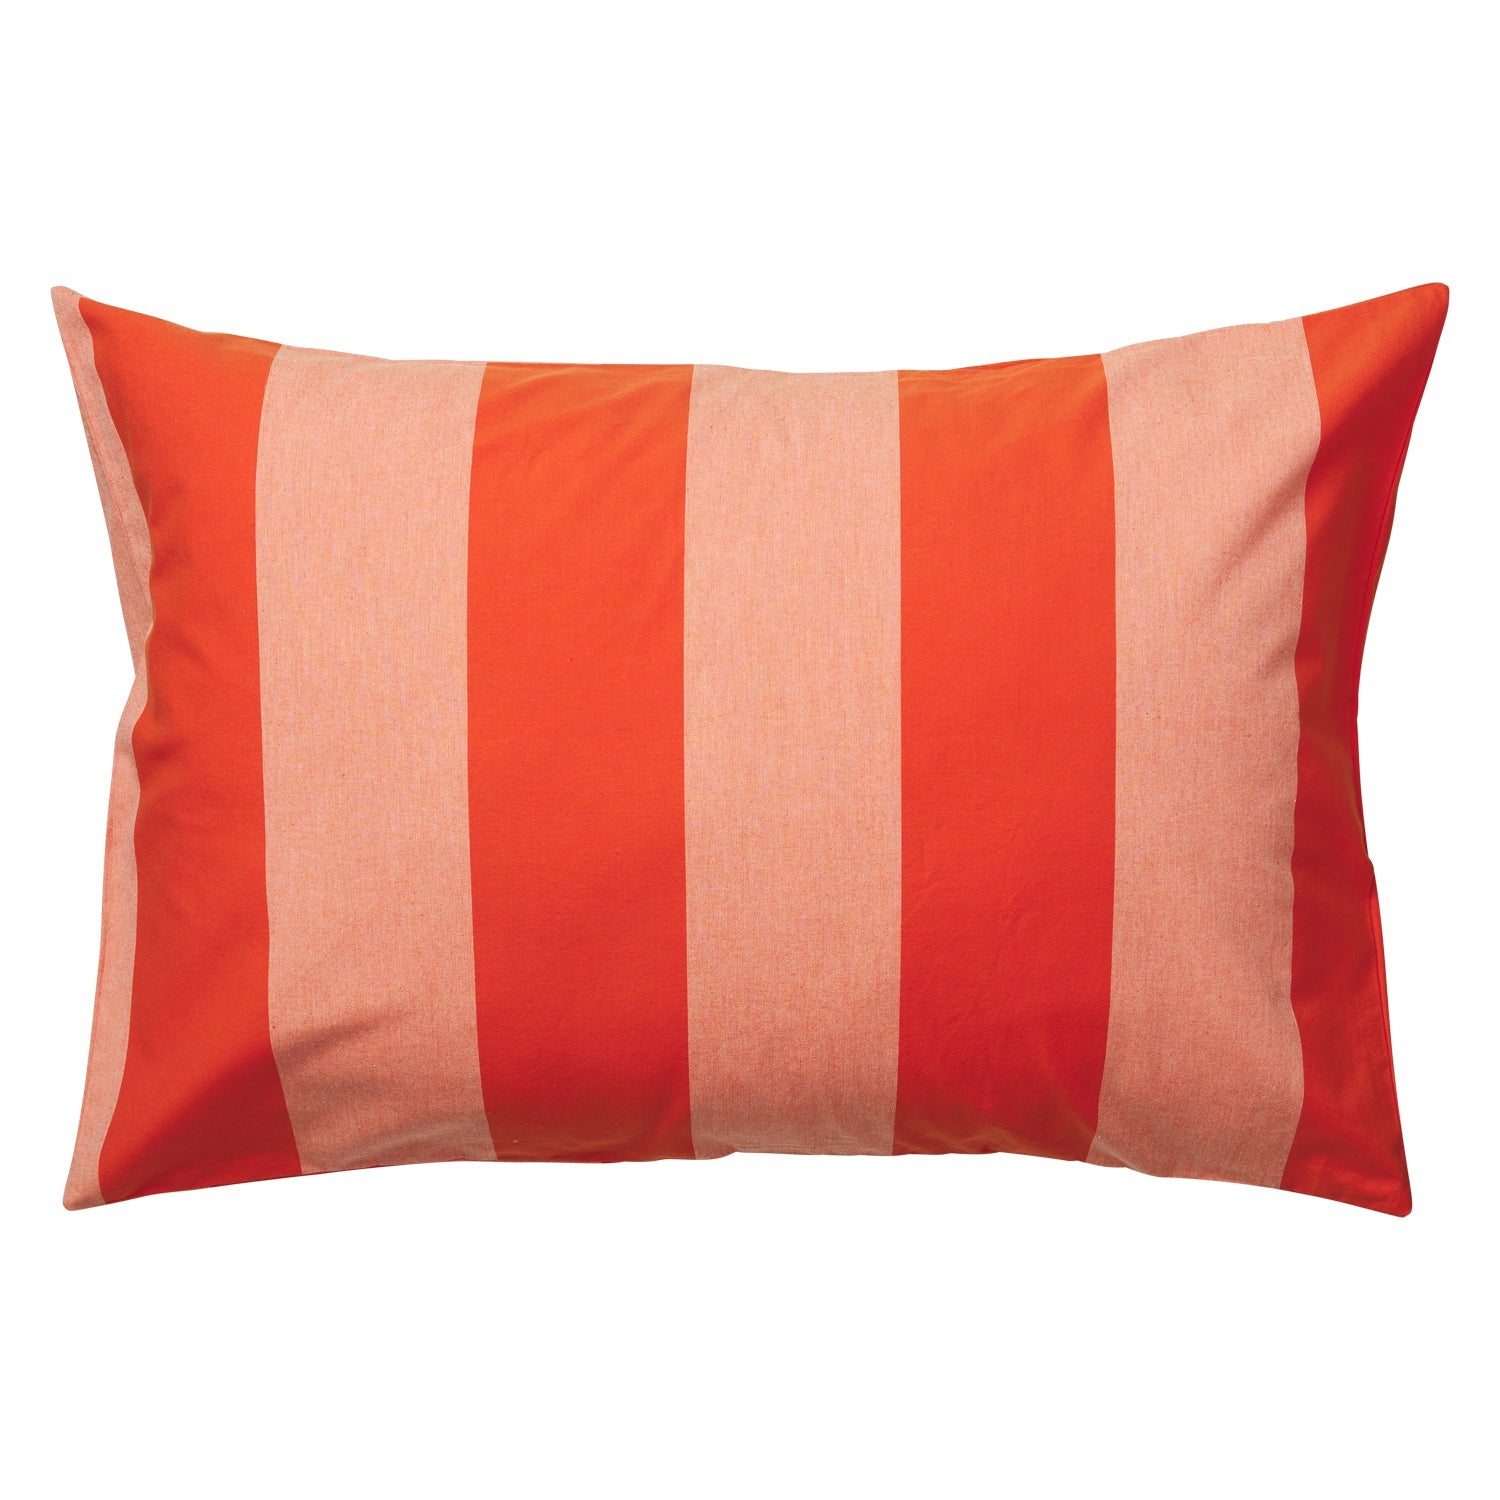 Blanca Cotton Pillowcase Set - Aperol - Standard-Soft Furnishings-PLAY by Sage & Clare-The Bay Room